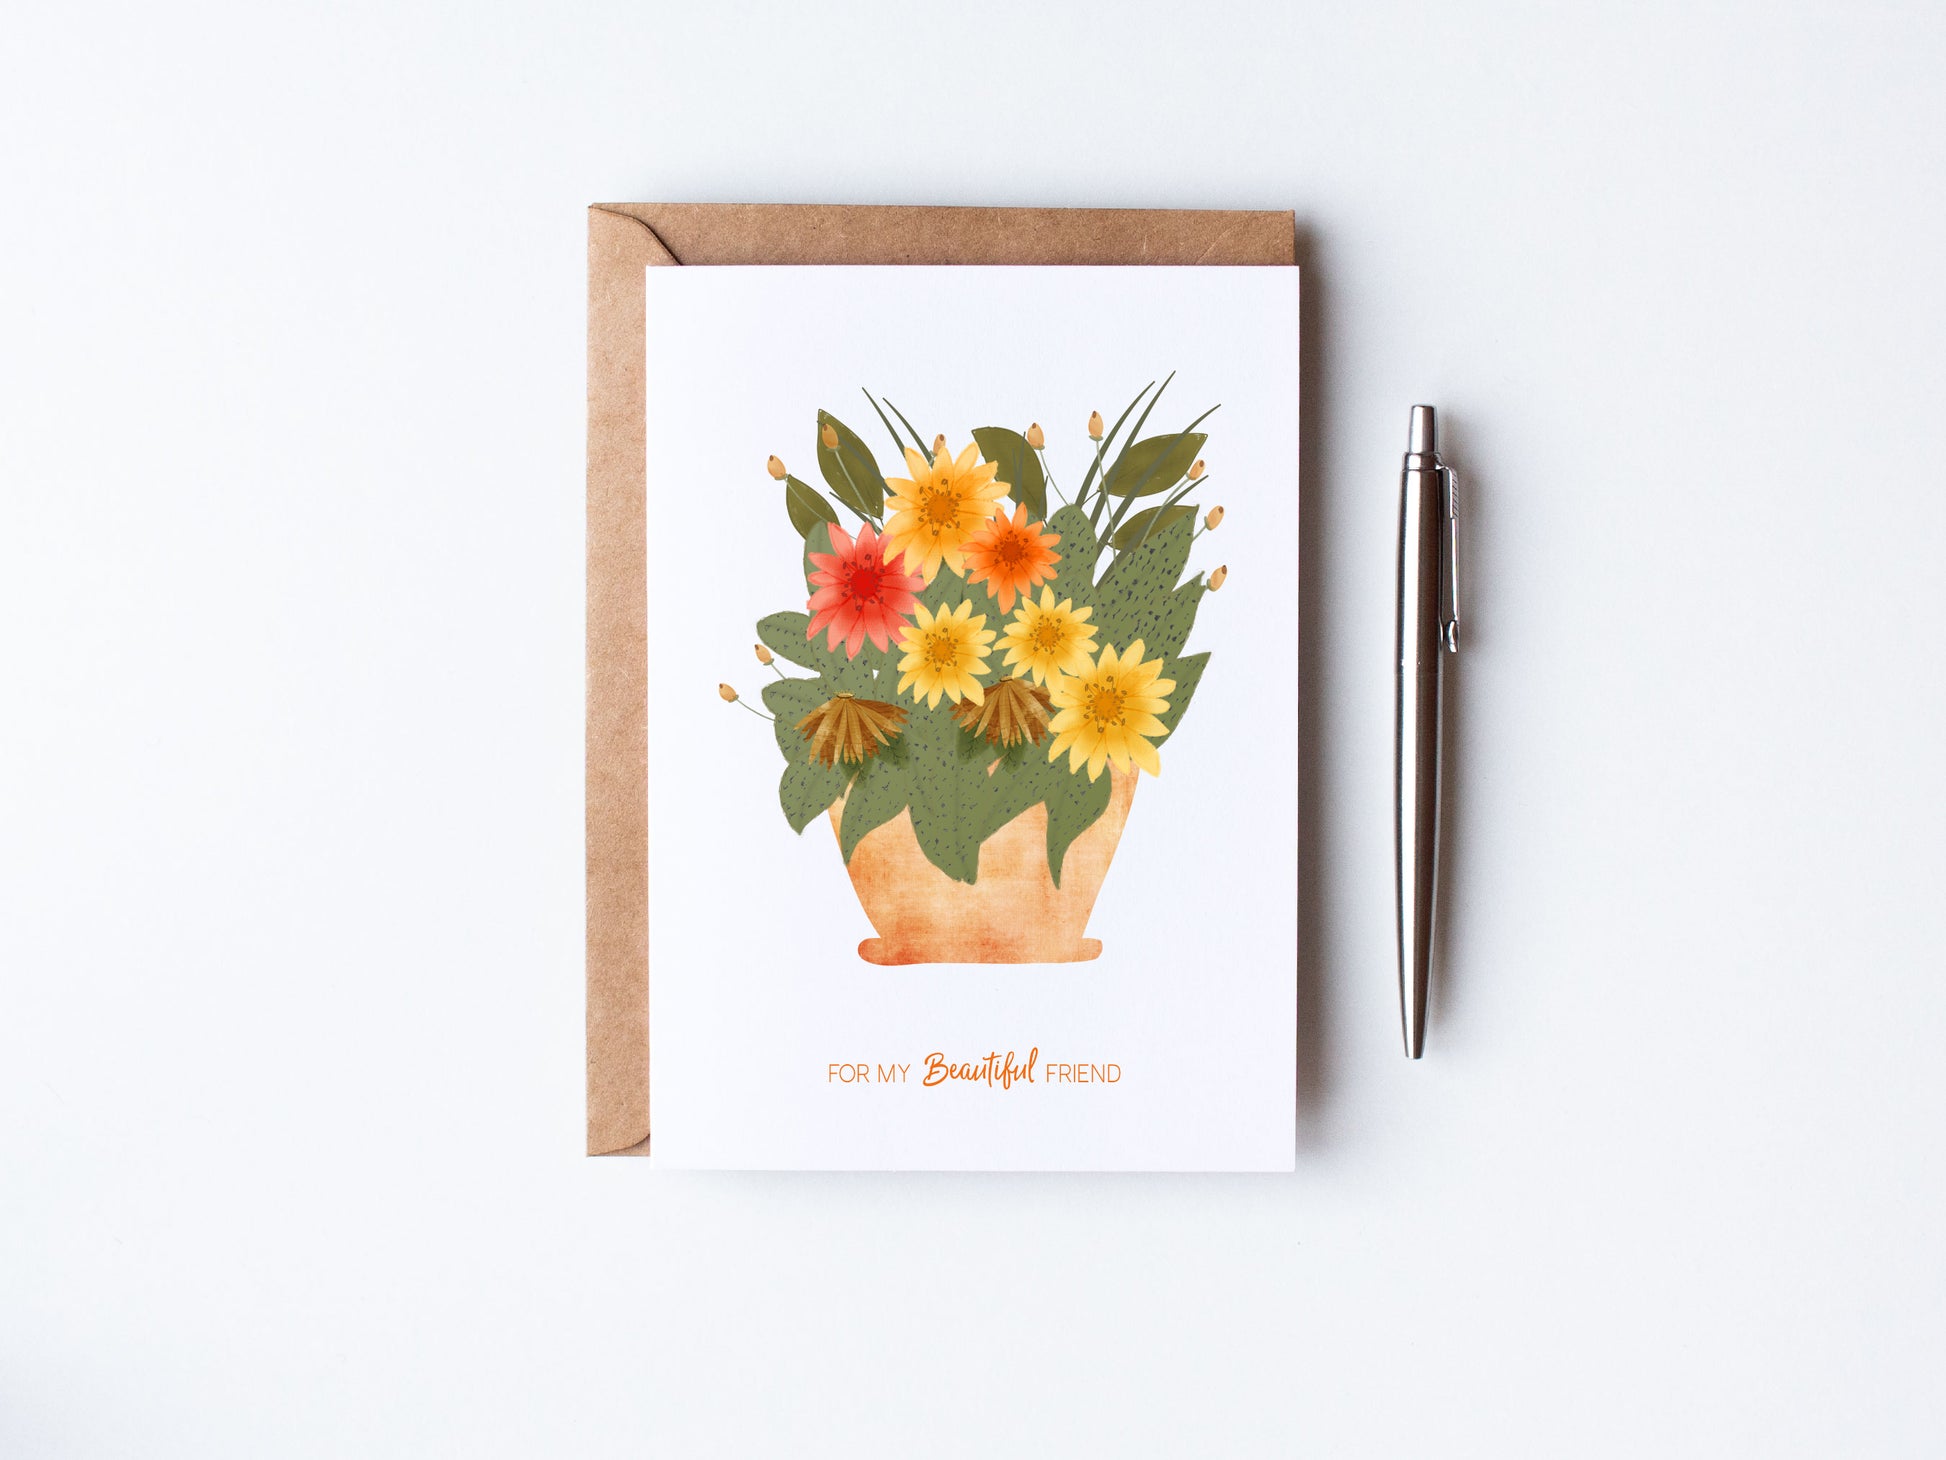 hand illustrated florals in a vase - gift card for friend